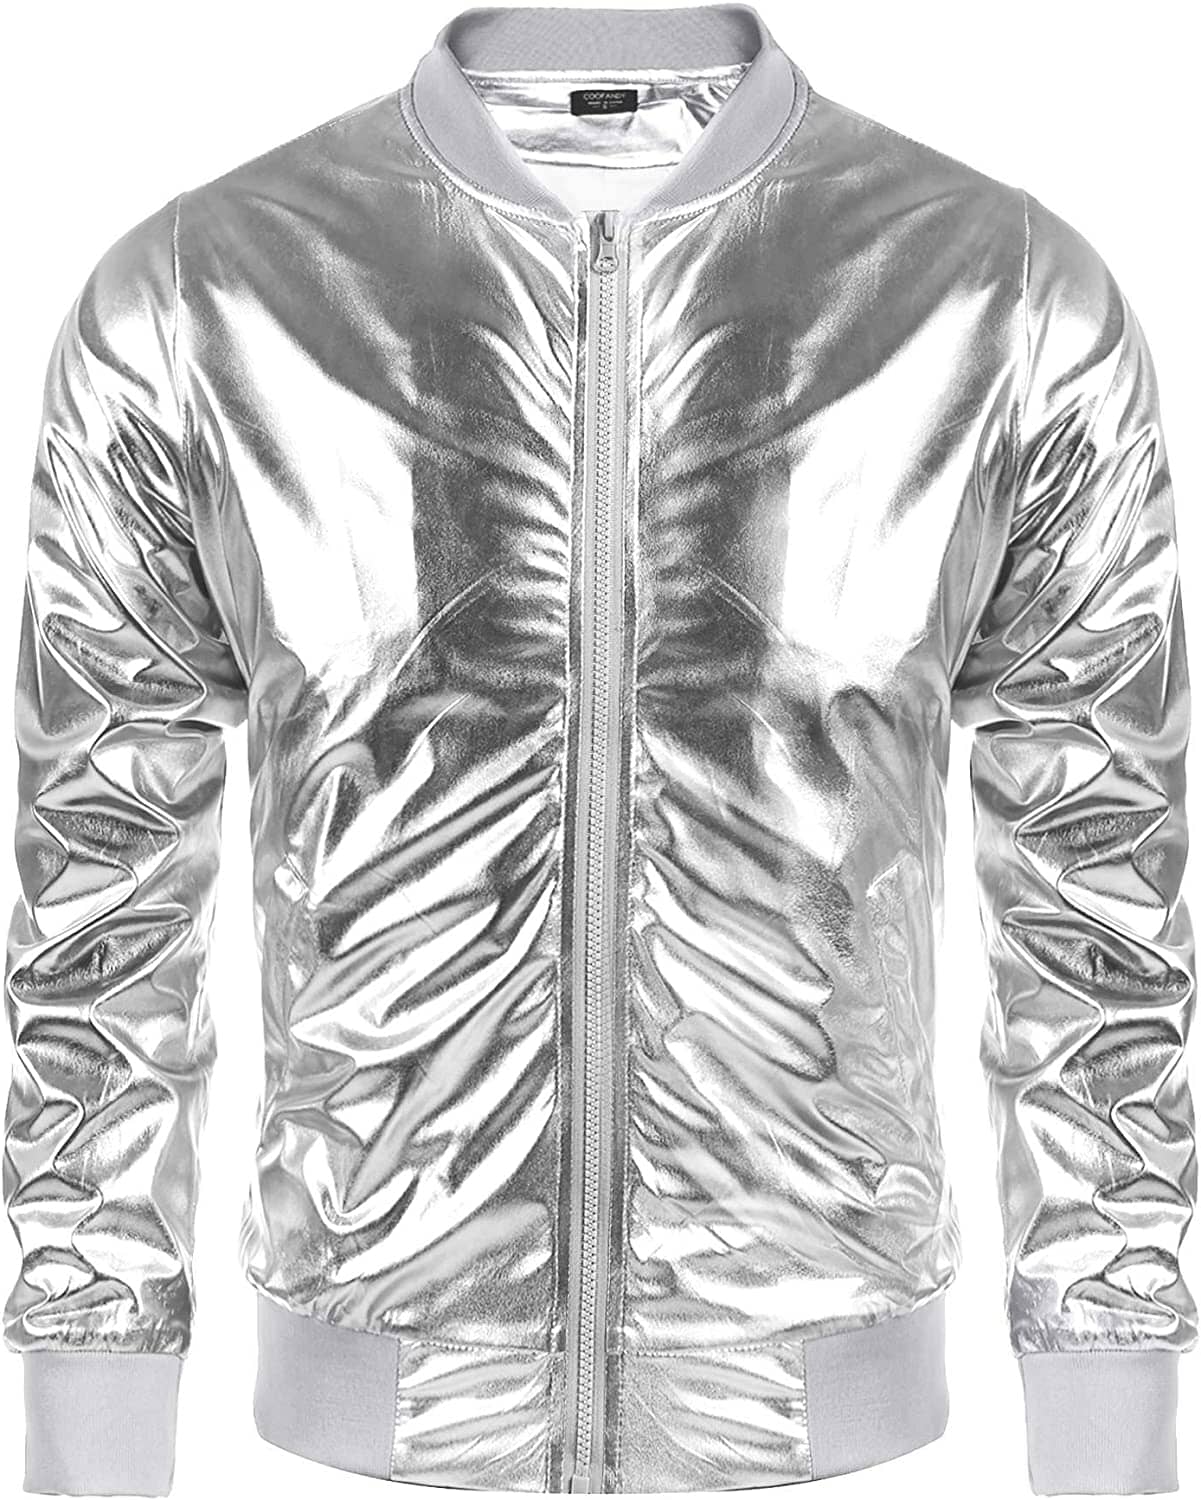 70s Disco Christmas Party Zip-up Jacket (US Only) Jackets COOFANDY Store Silver S 